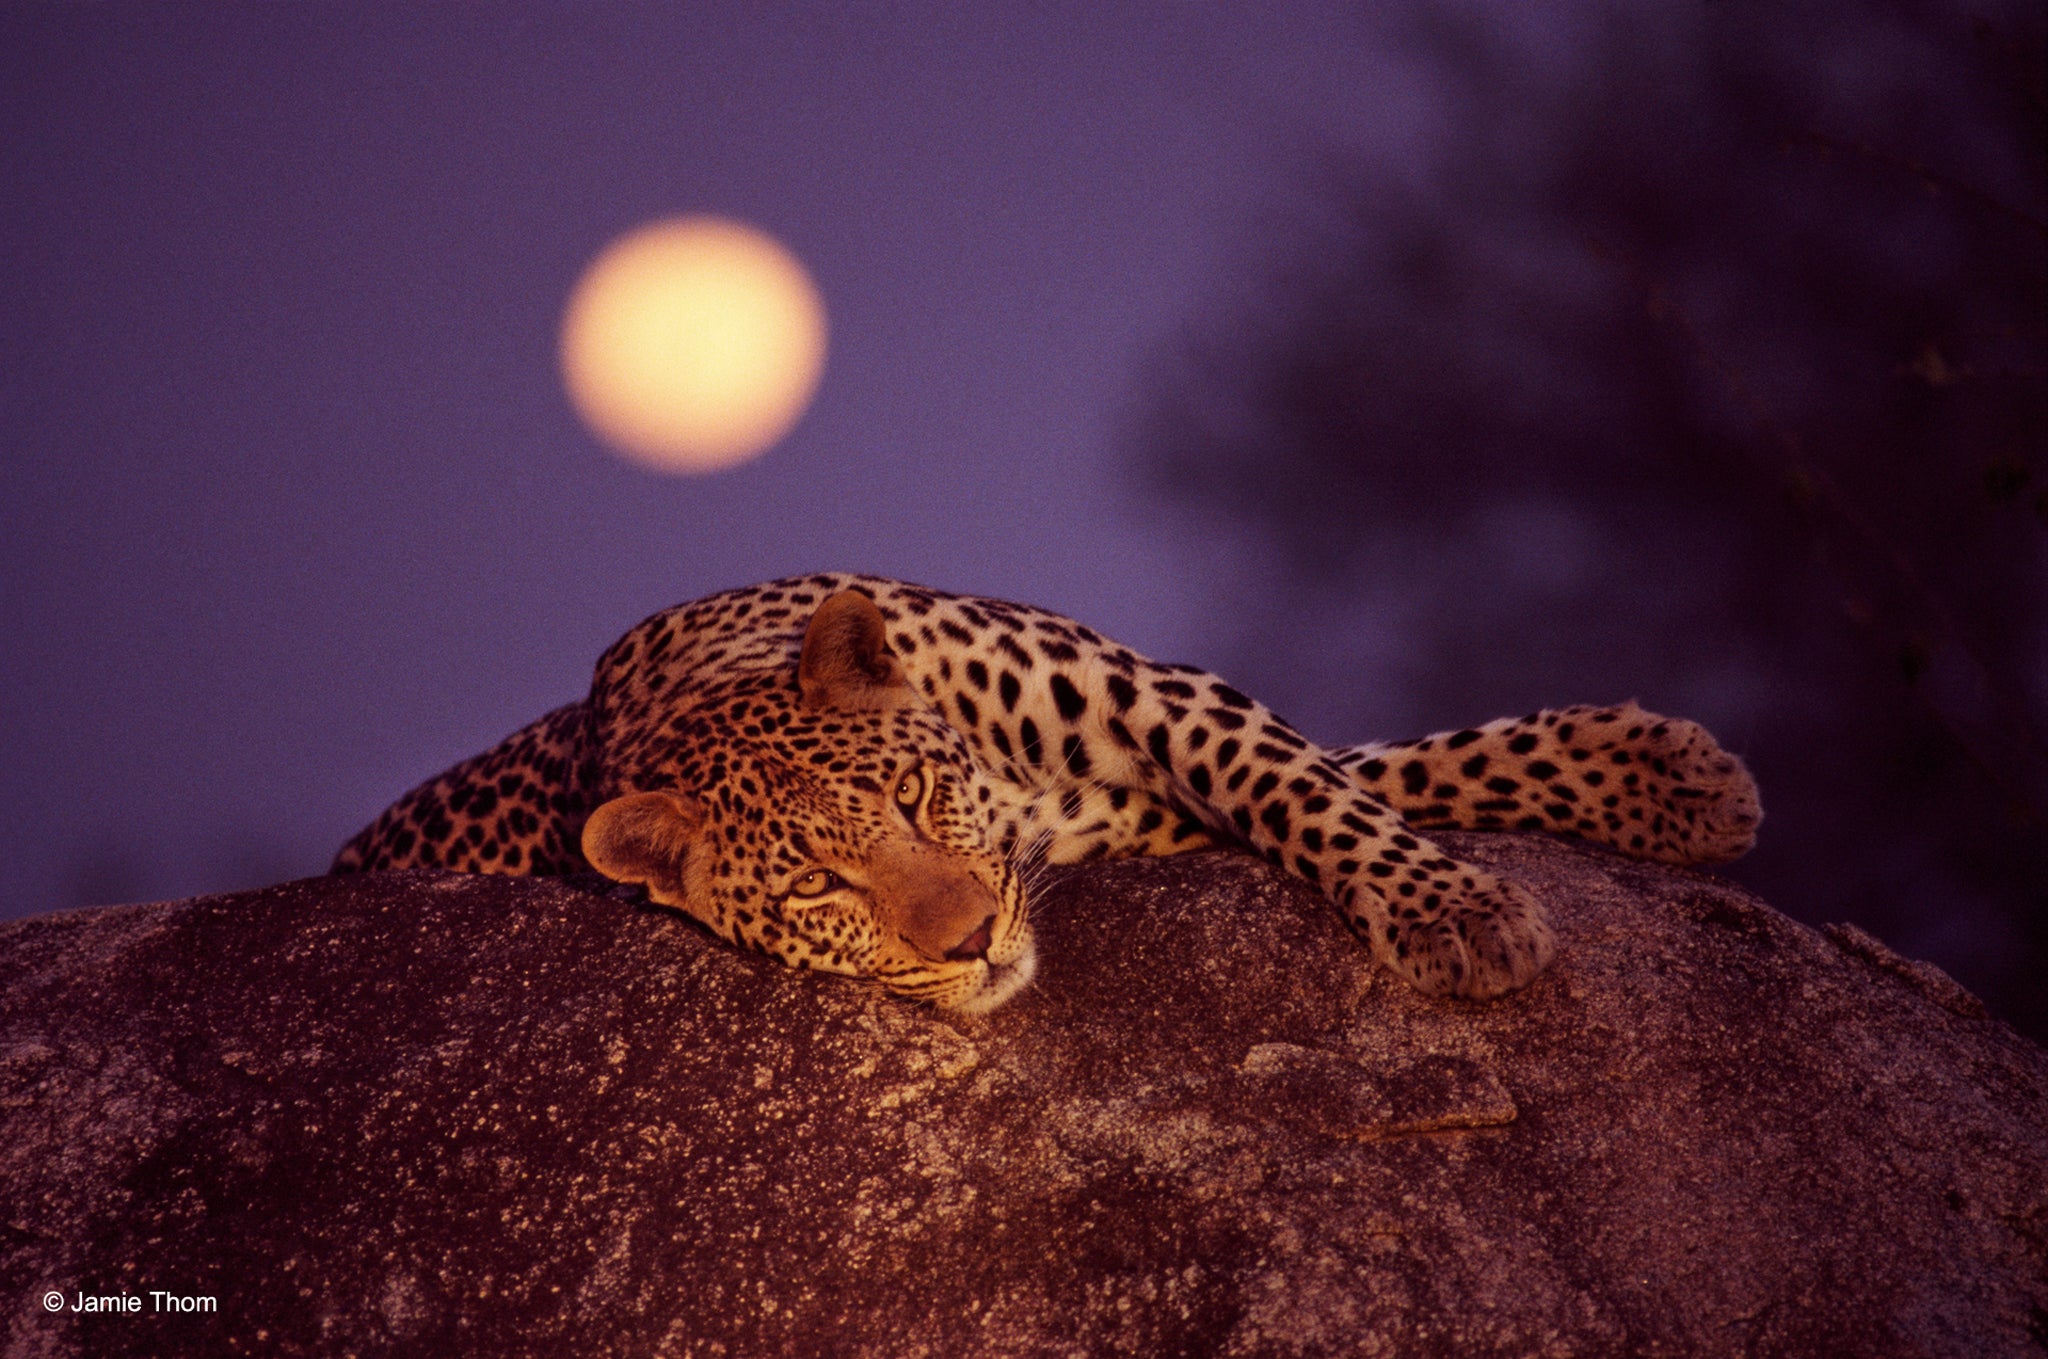 Jamie Thom - Leopard with rising moon, 1999